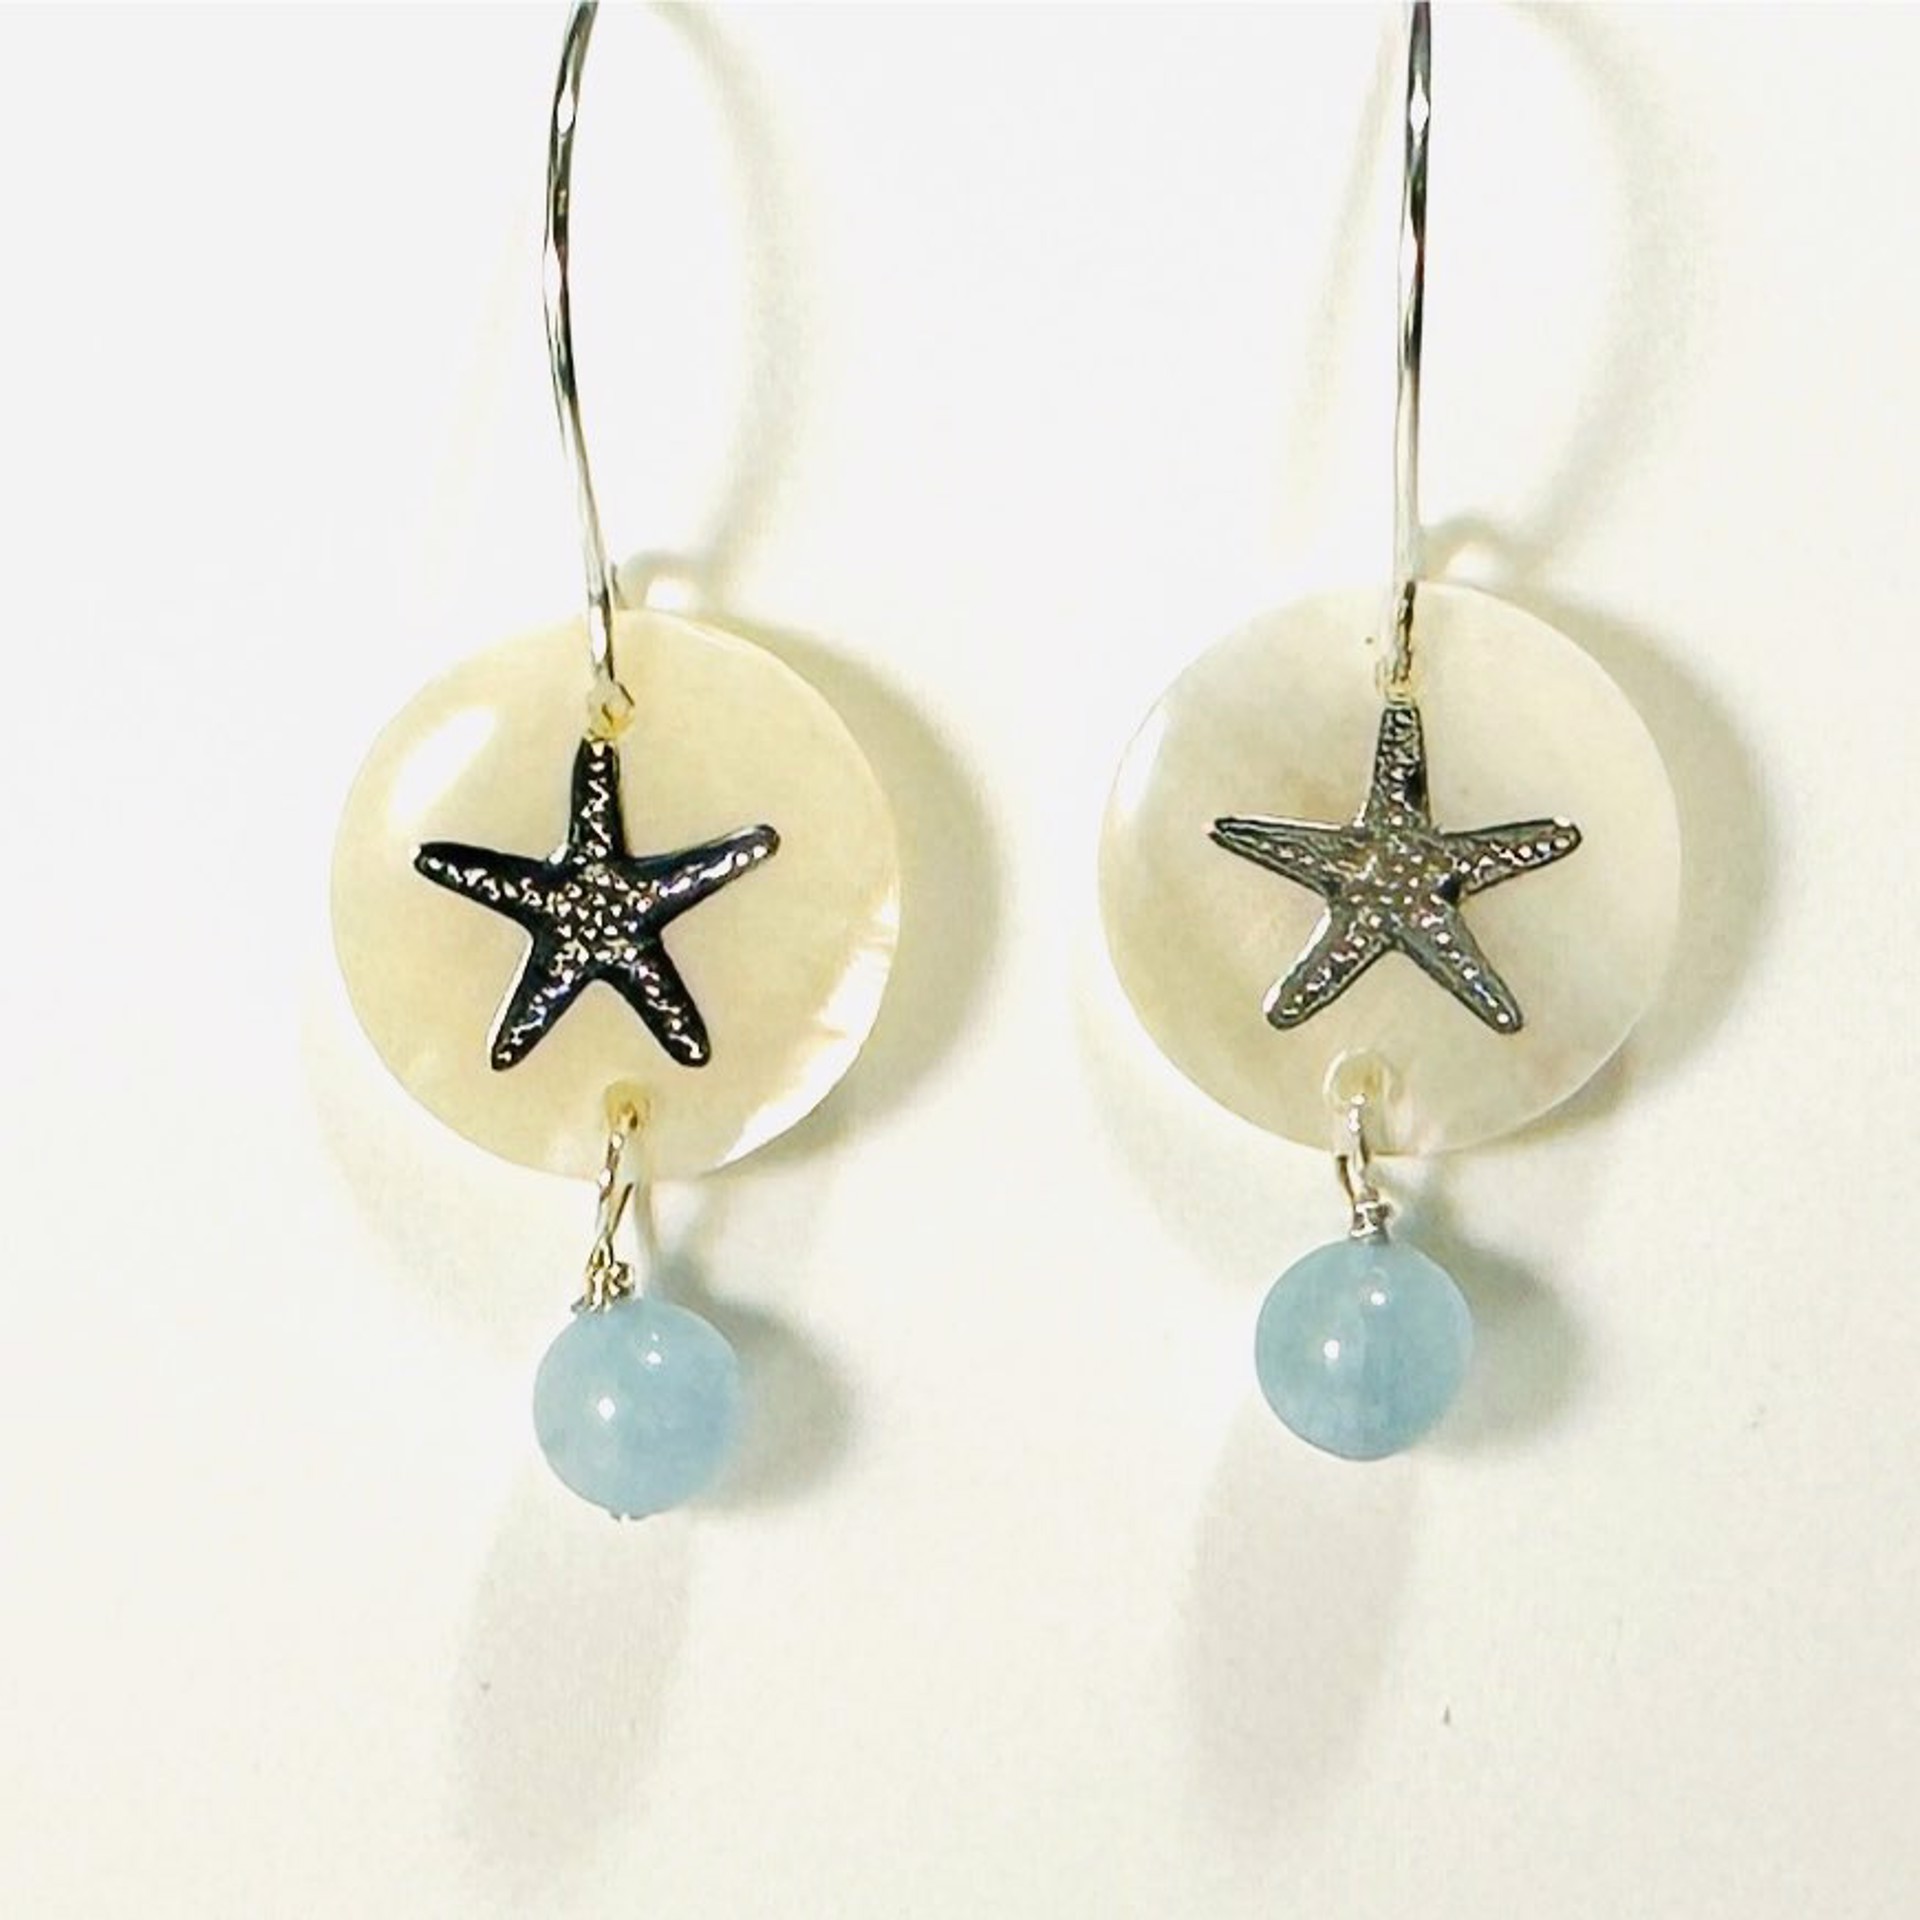 Mother of Pearl-Starfish, Aqumarine Earrings LR24-40 by Legare Riano